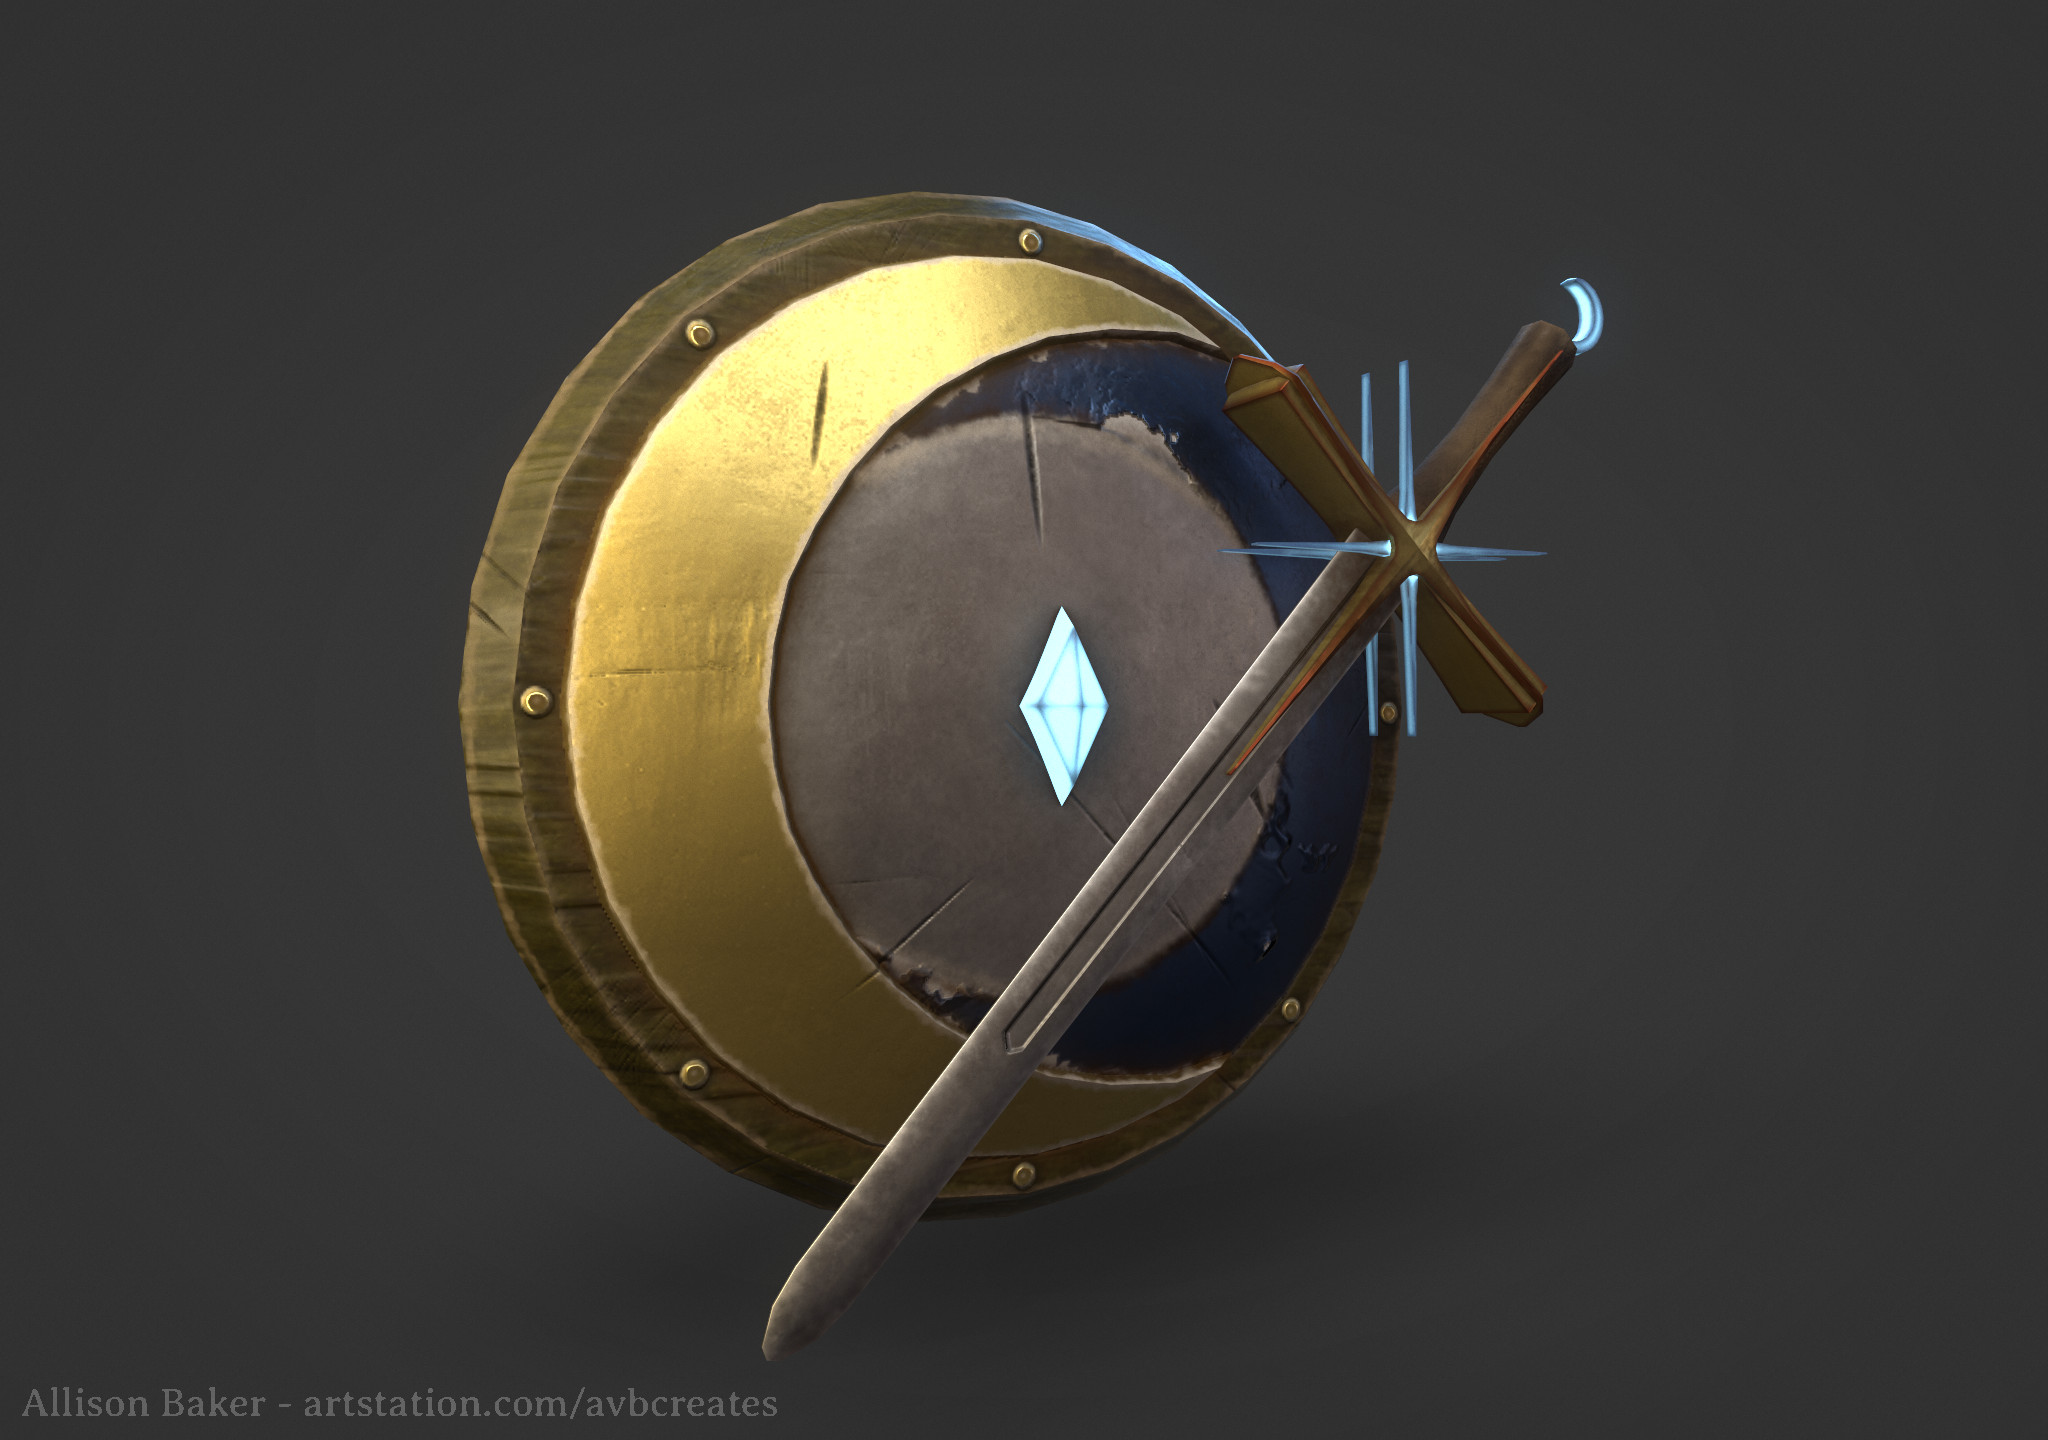 Sword and Shield. The moon and stars hold ancient power.